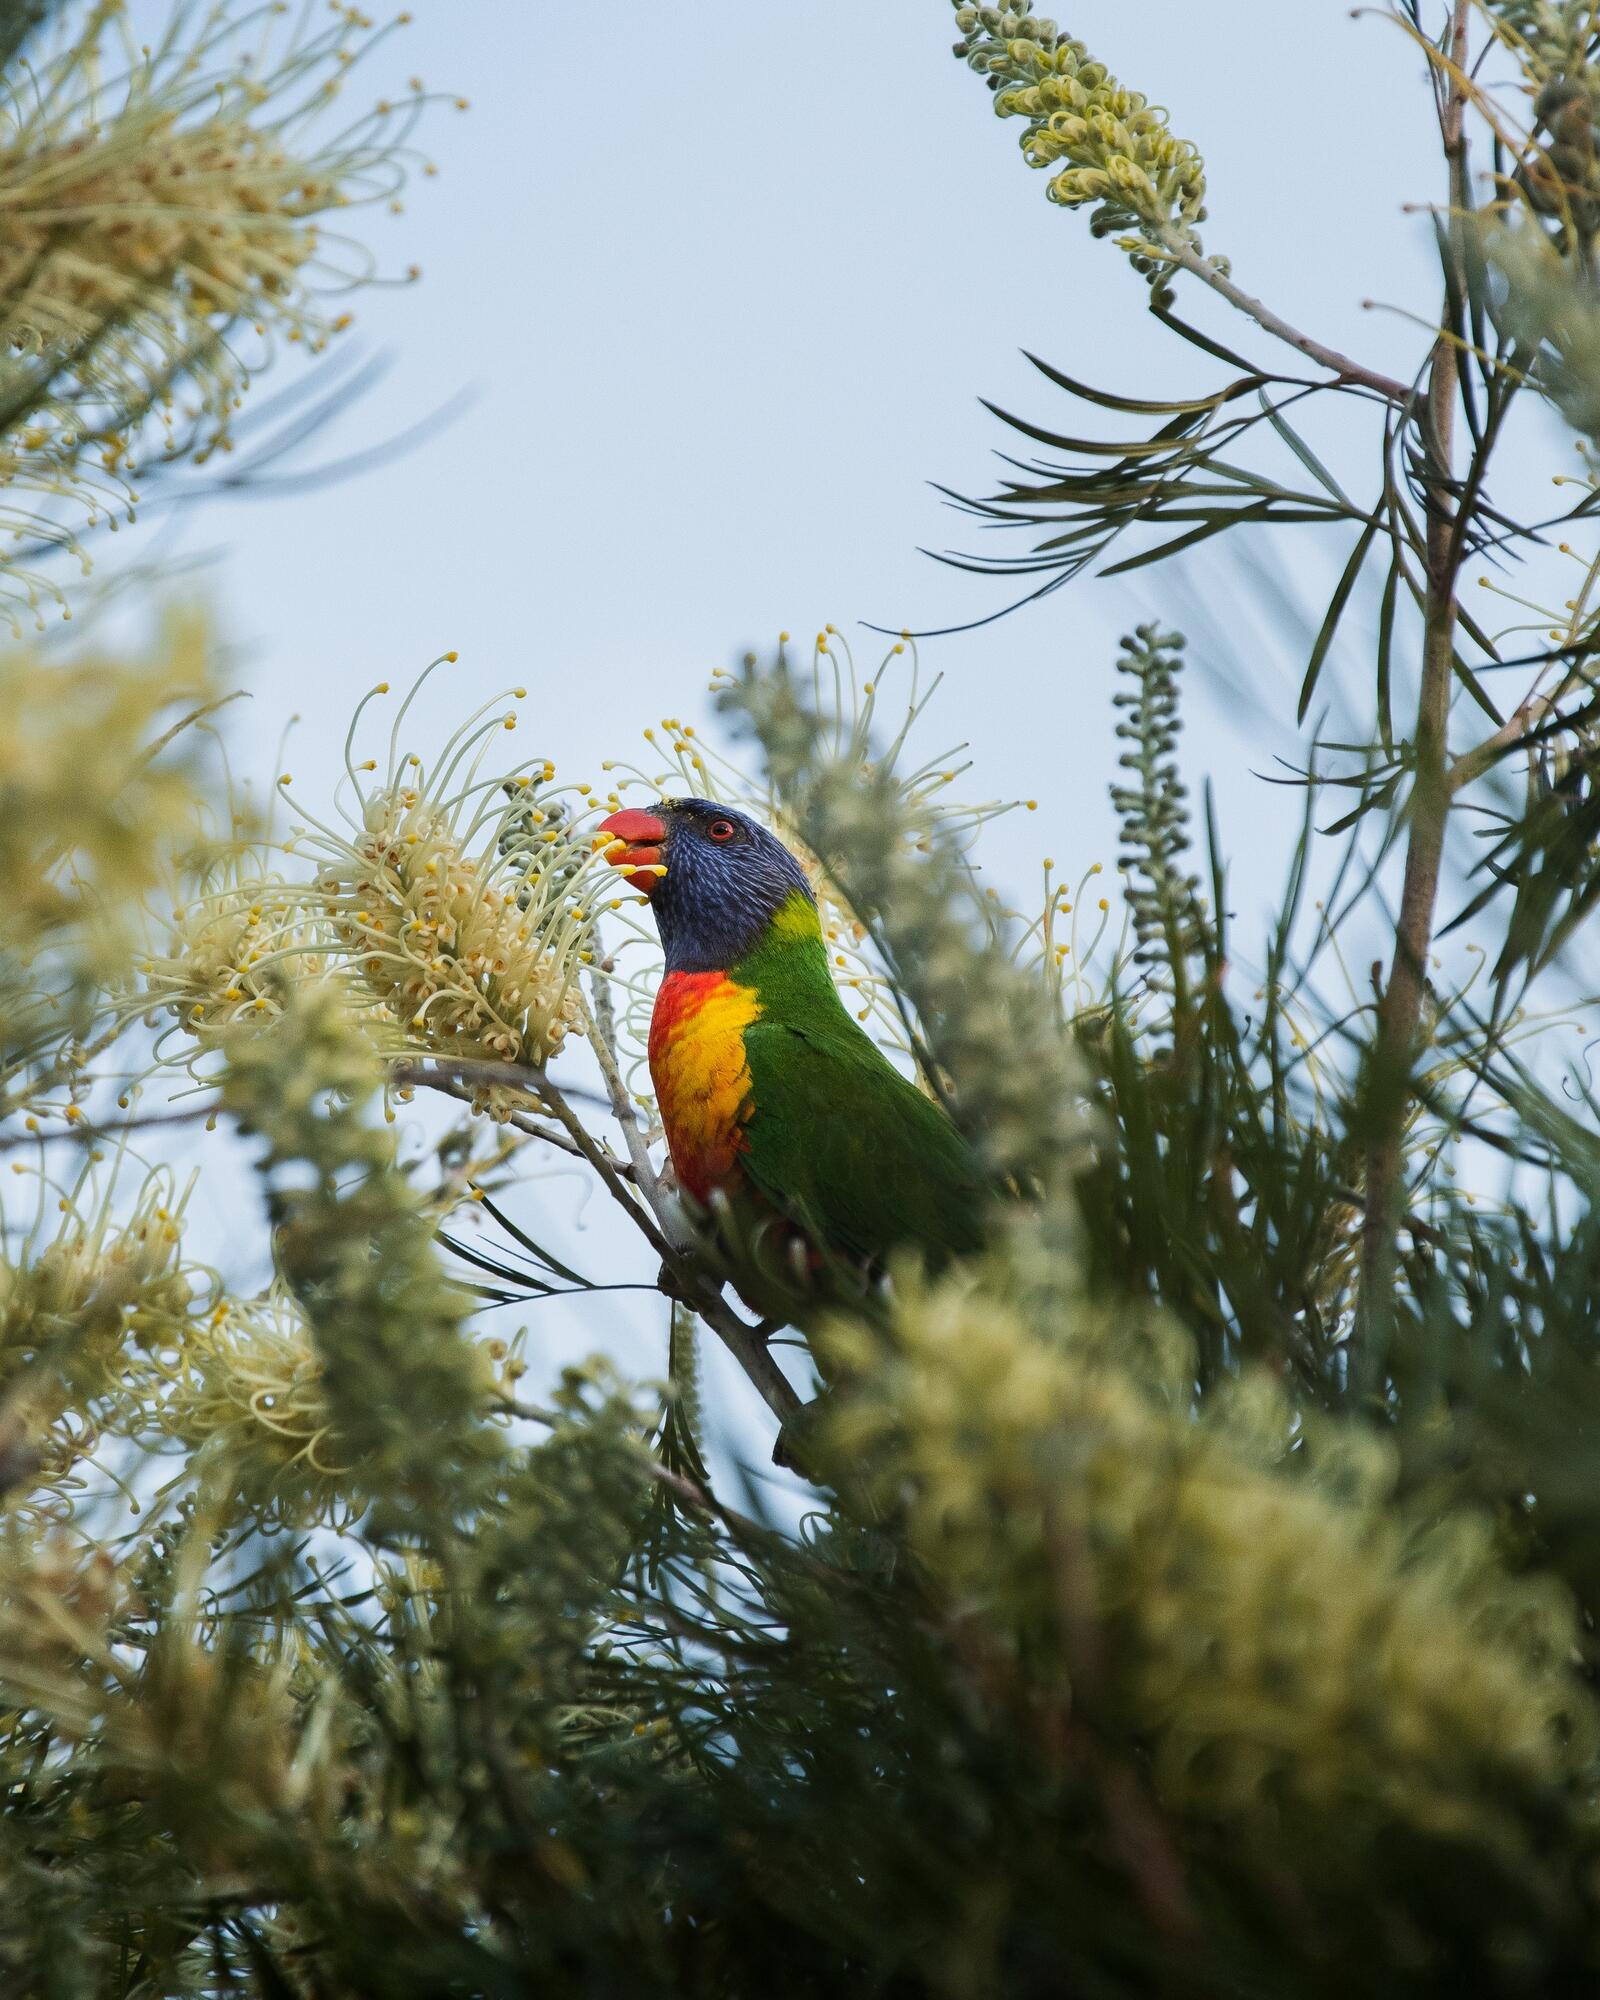 A colorful multicolored parrot in the branches of a tree